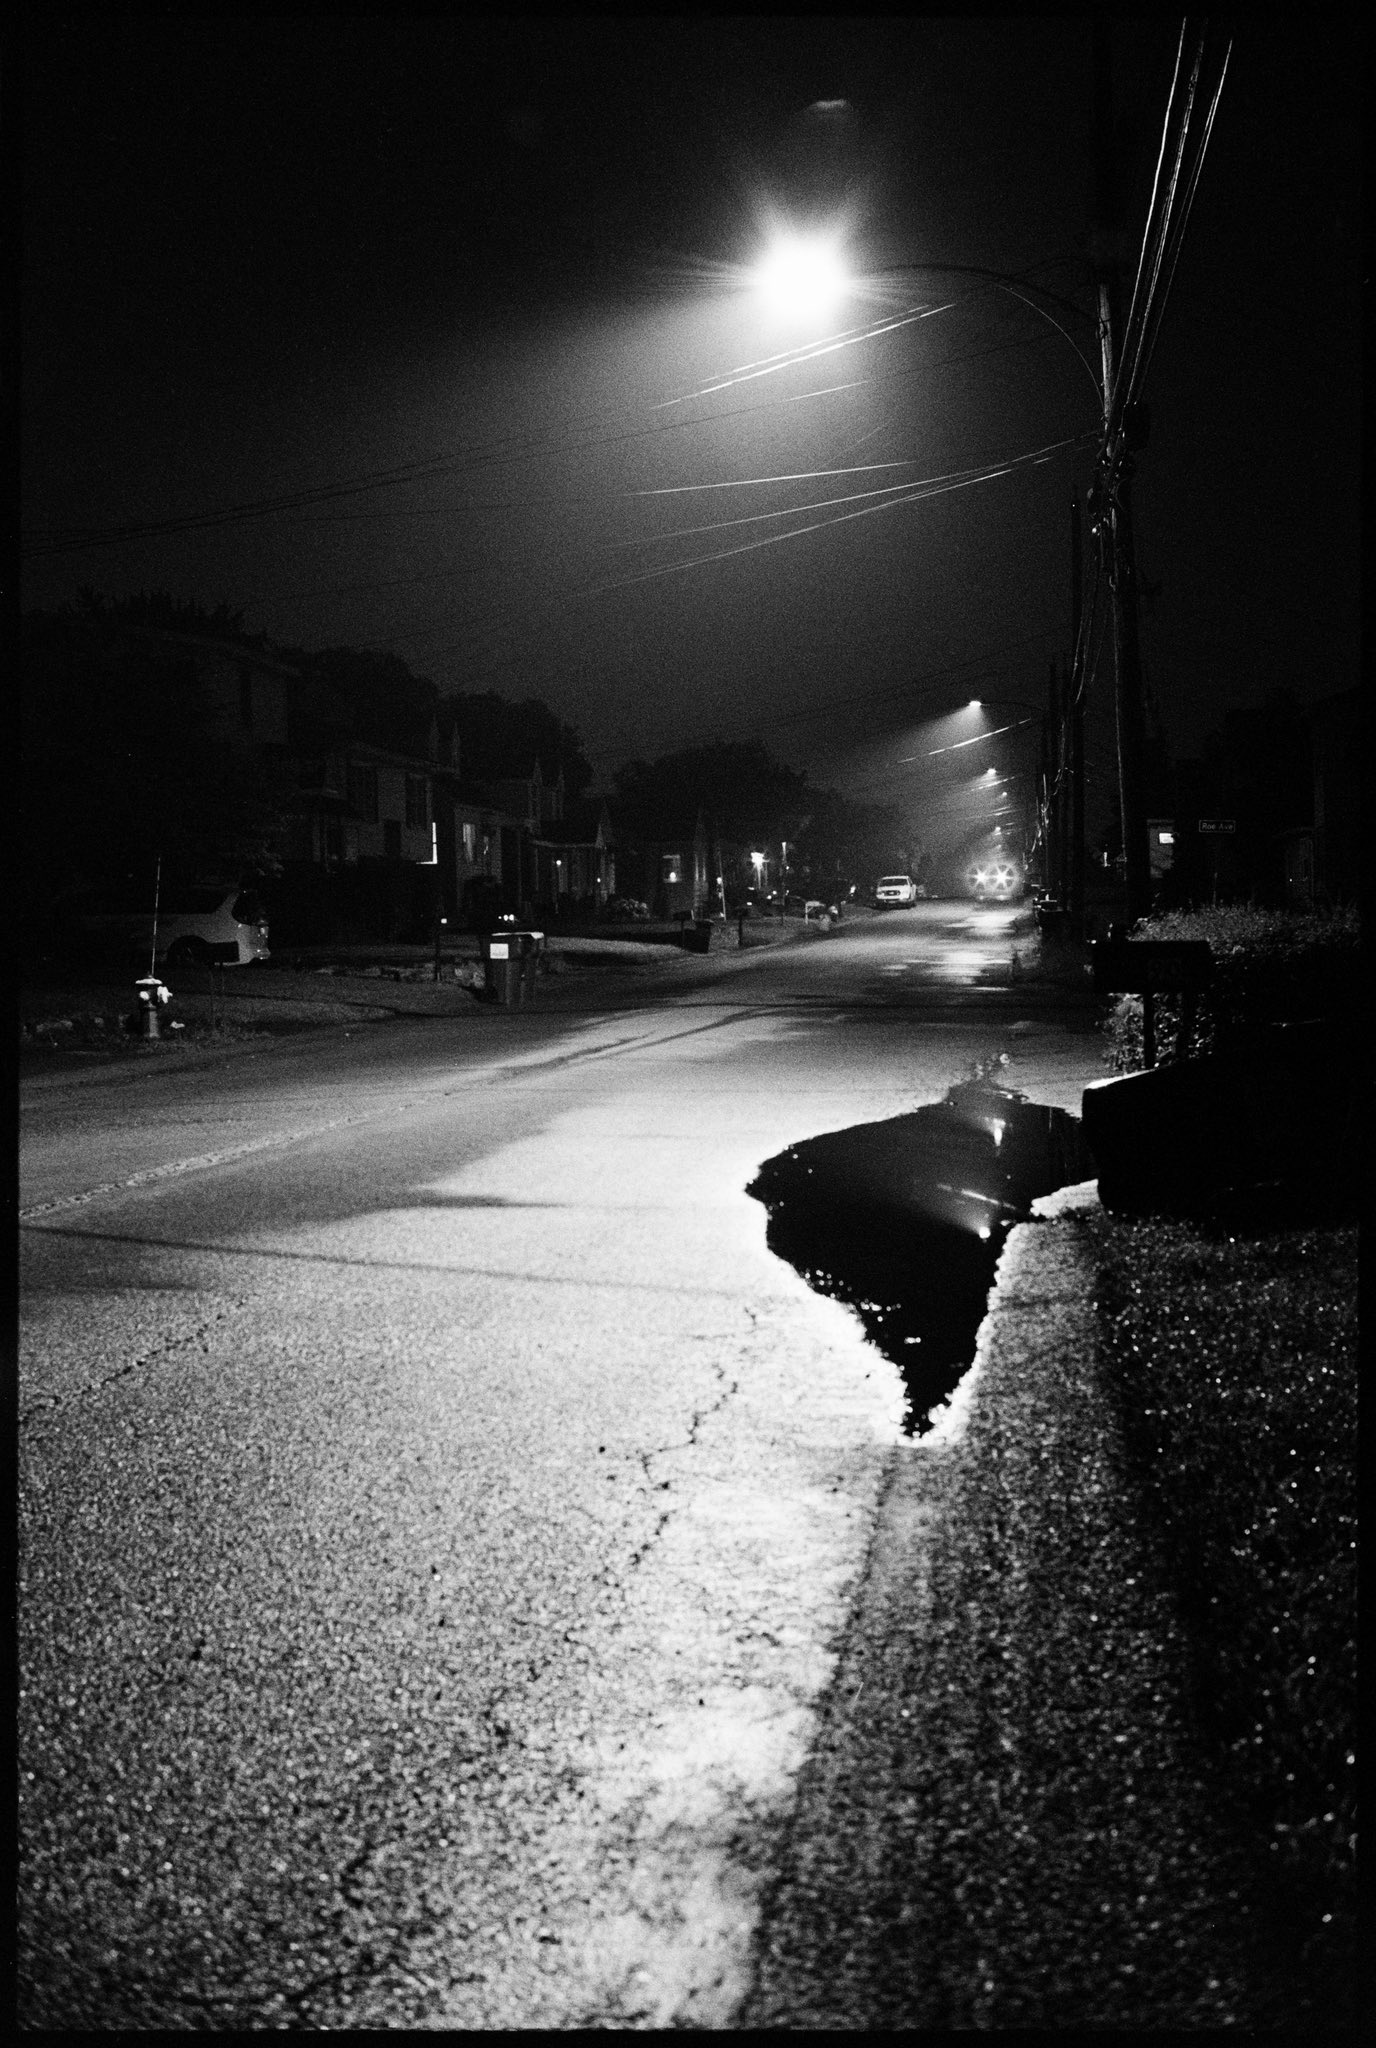 @MattAngleyPhotoI like those calm, late nights in summer when the world seems to slow to a crawl. The roads are barren, everything is still, and all you hear are night critters. These moments allow me to slow down the world. 🎞️ Delta 400 #ilfordphoto #frommywindow #fridayfavourites